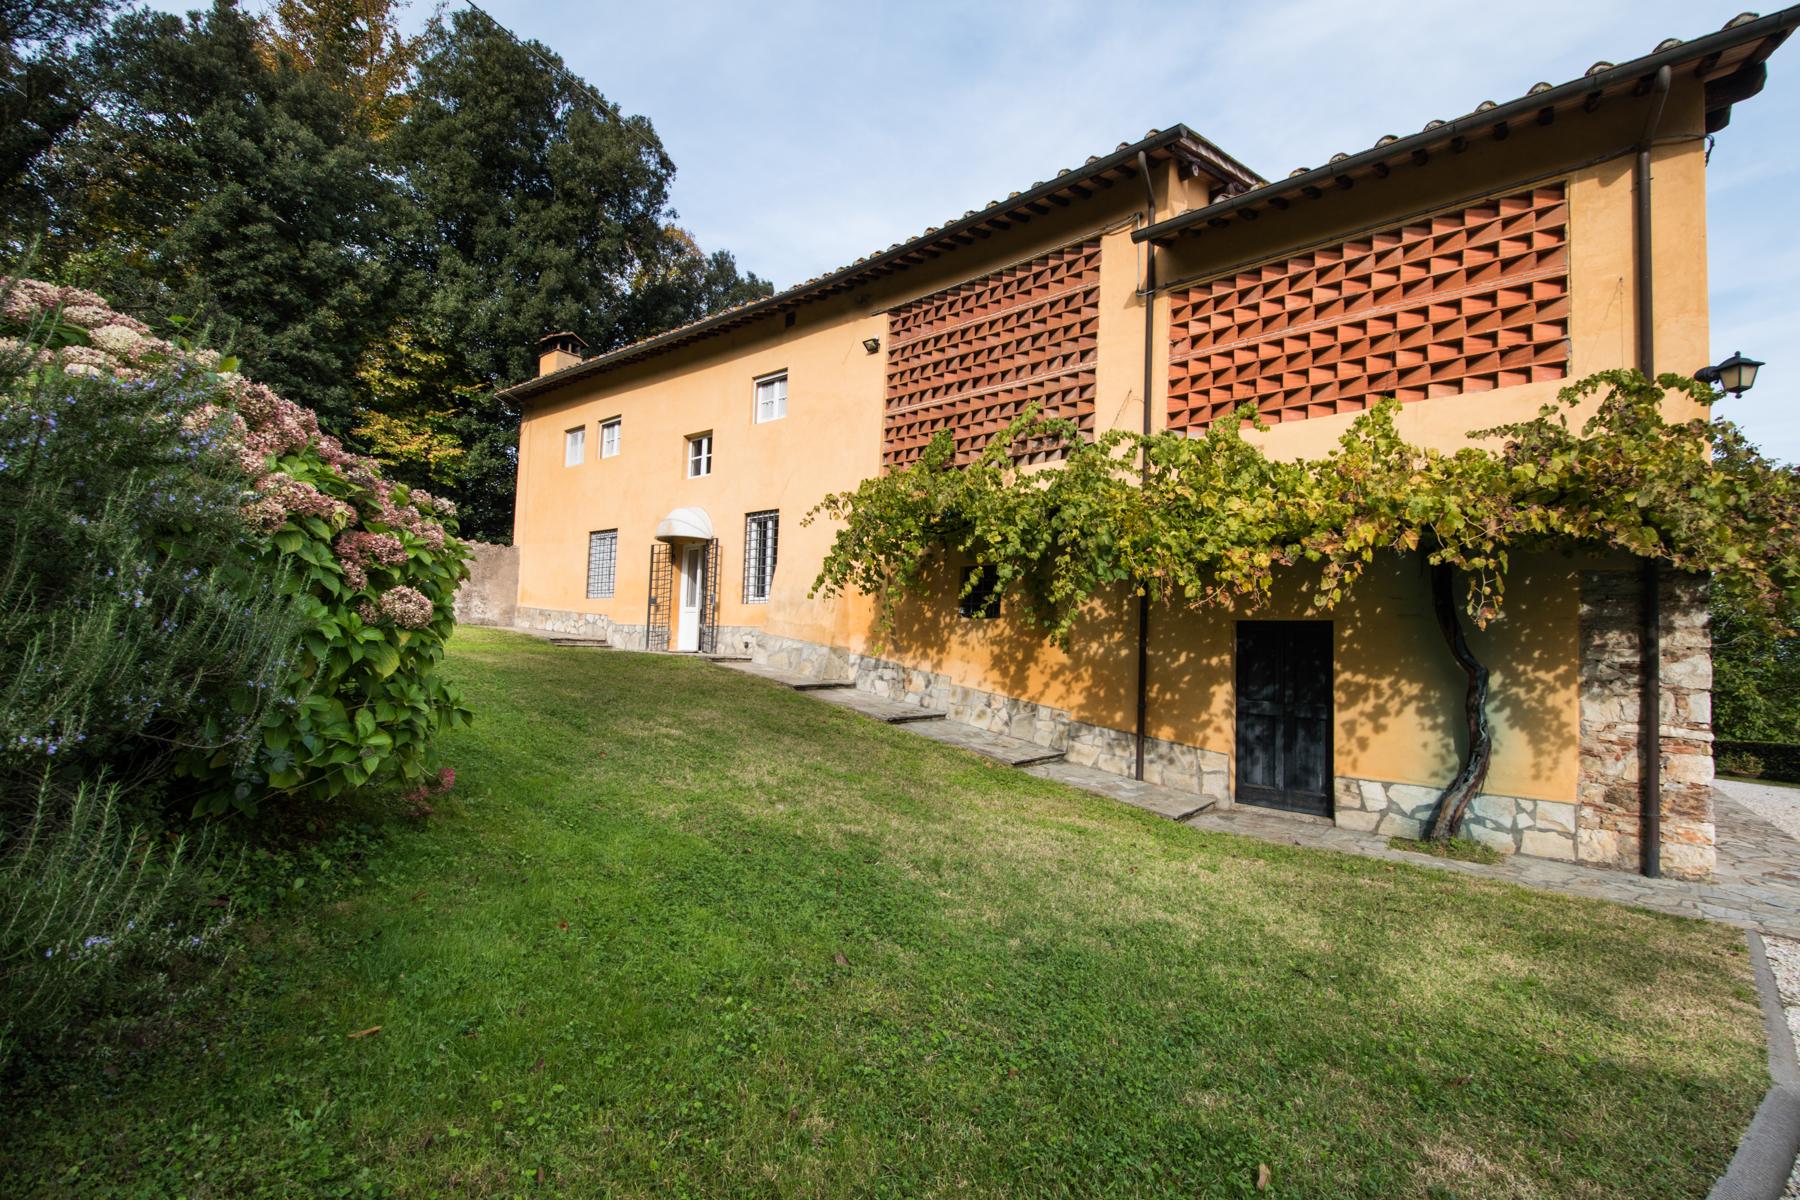 Charming 18th century villa in Lucca countryside - 31